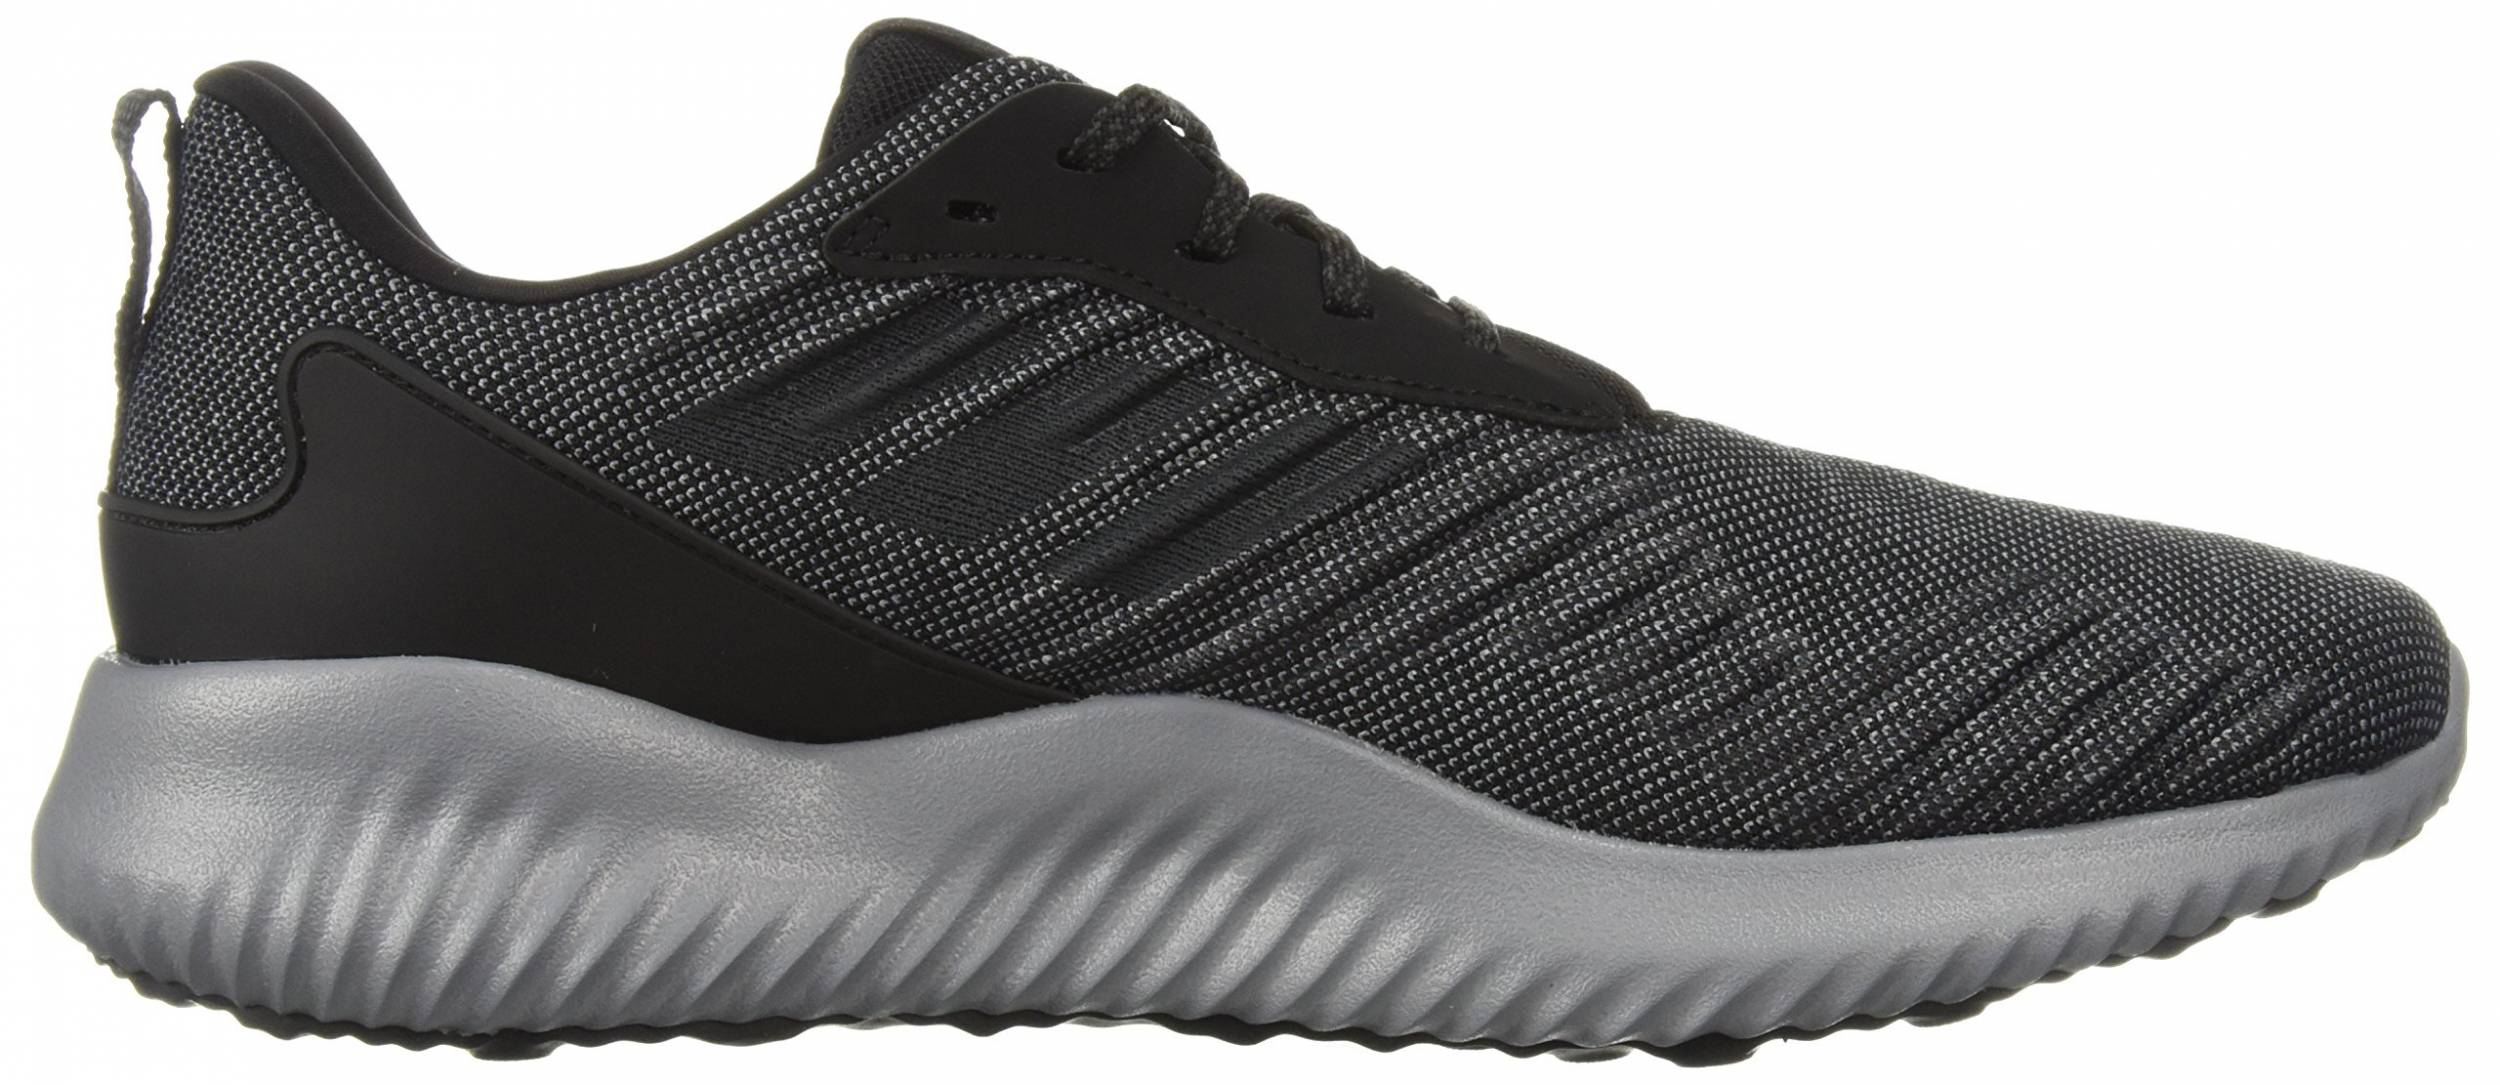 loose the temper coin exile Adidas Alphabounce RC Review 2022, Facts, Deals | RunRepeat